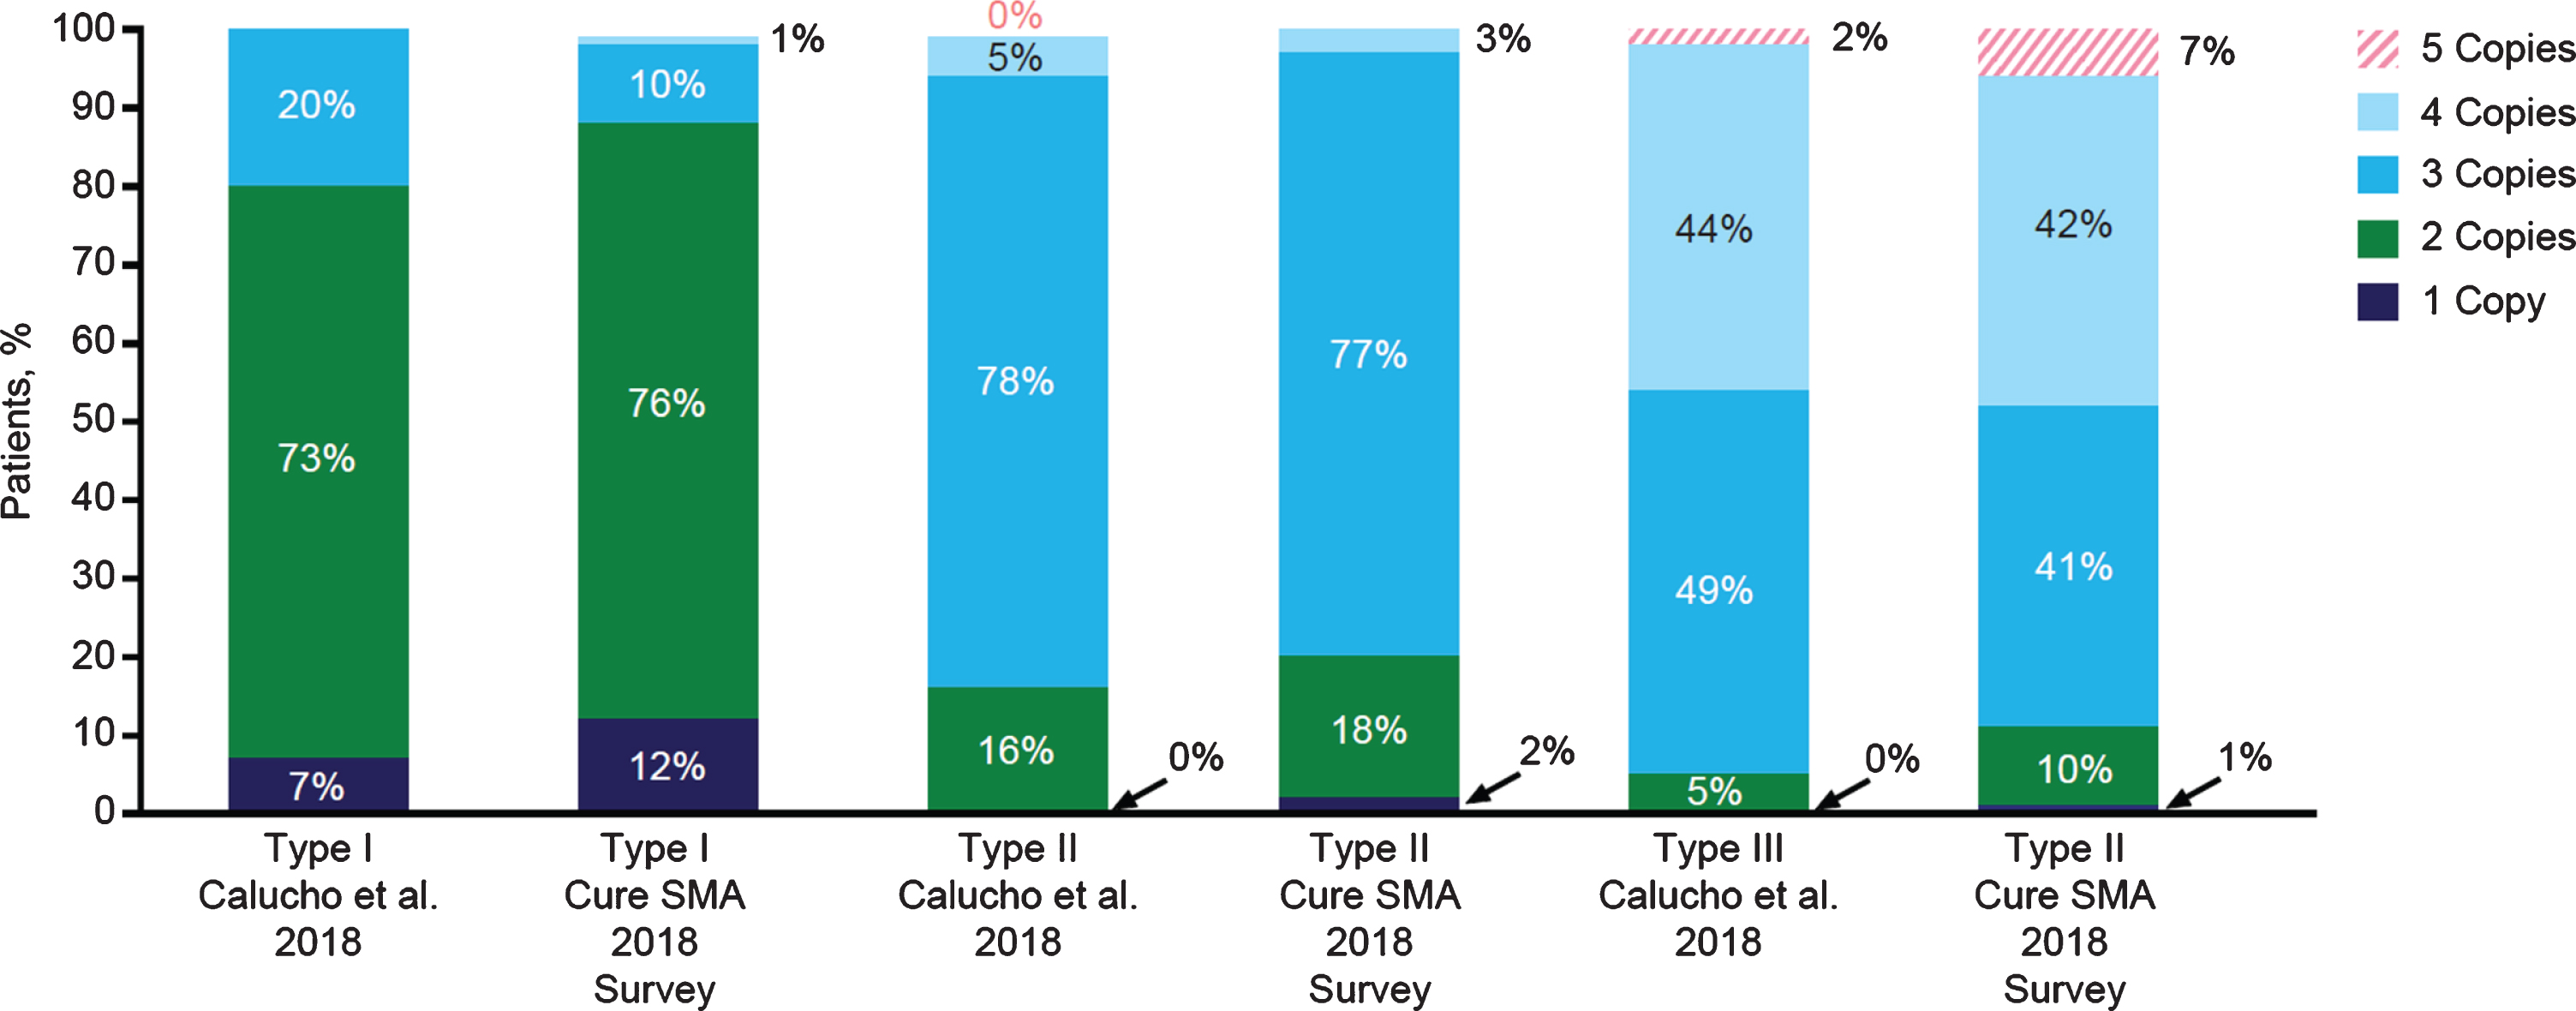 SMN2 gene copy number by spinal muscular atrophy (SMA) type. Distributions of SMN2 gene copy numbers observed in the 2018 Cure SMA survey (among those with valid responses) and those reported in a recent analysis by Calucho et al., 2018 [58] for each SMA type.